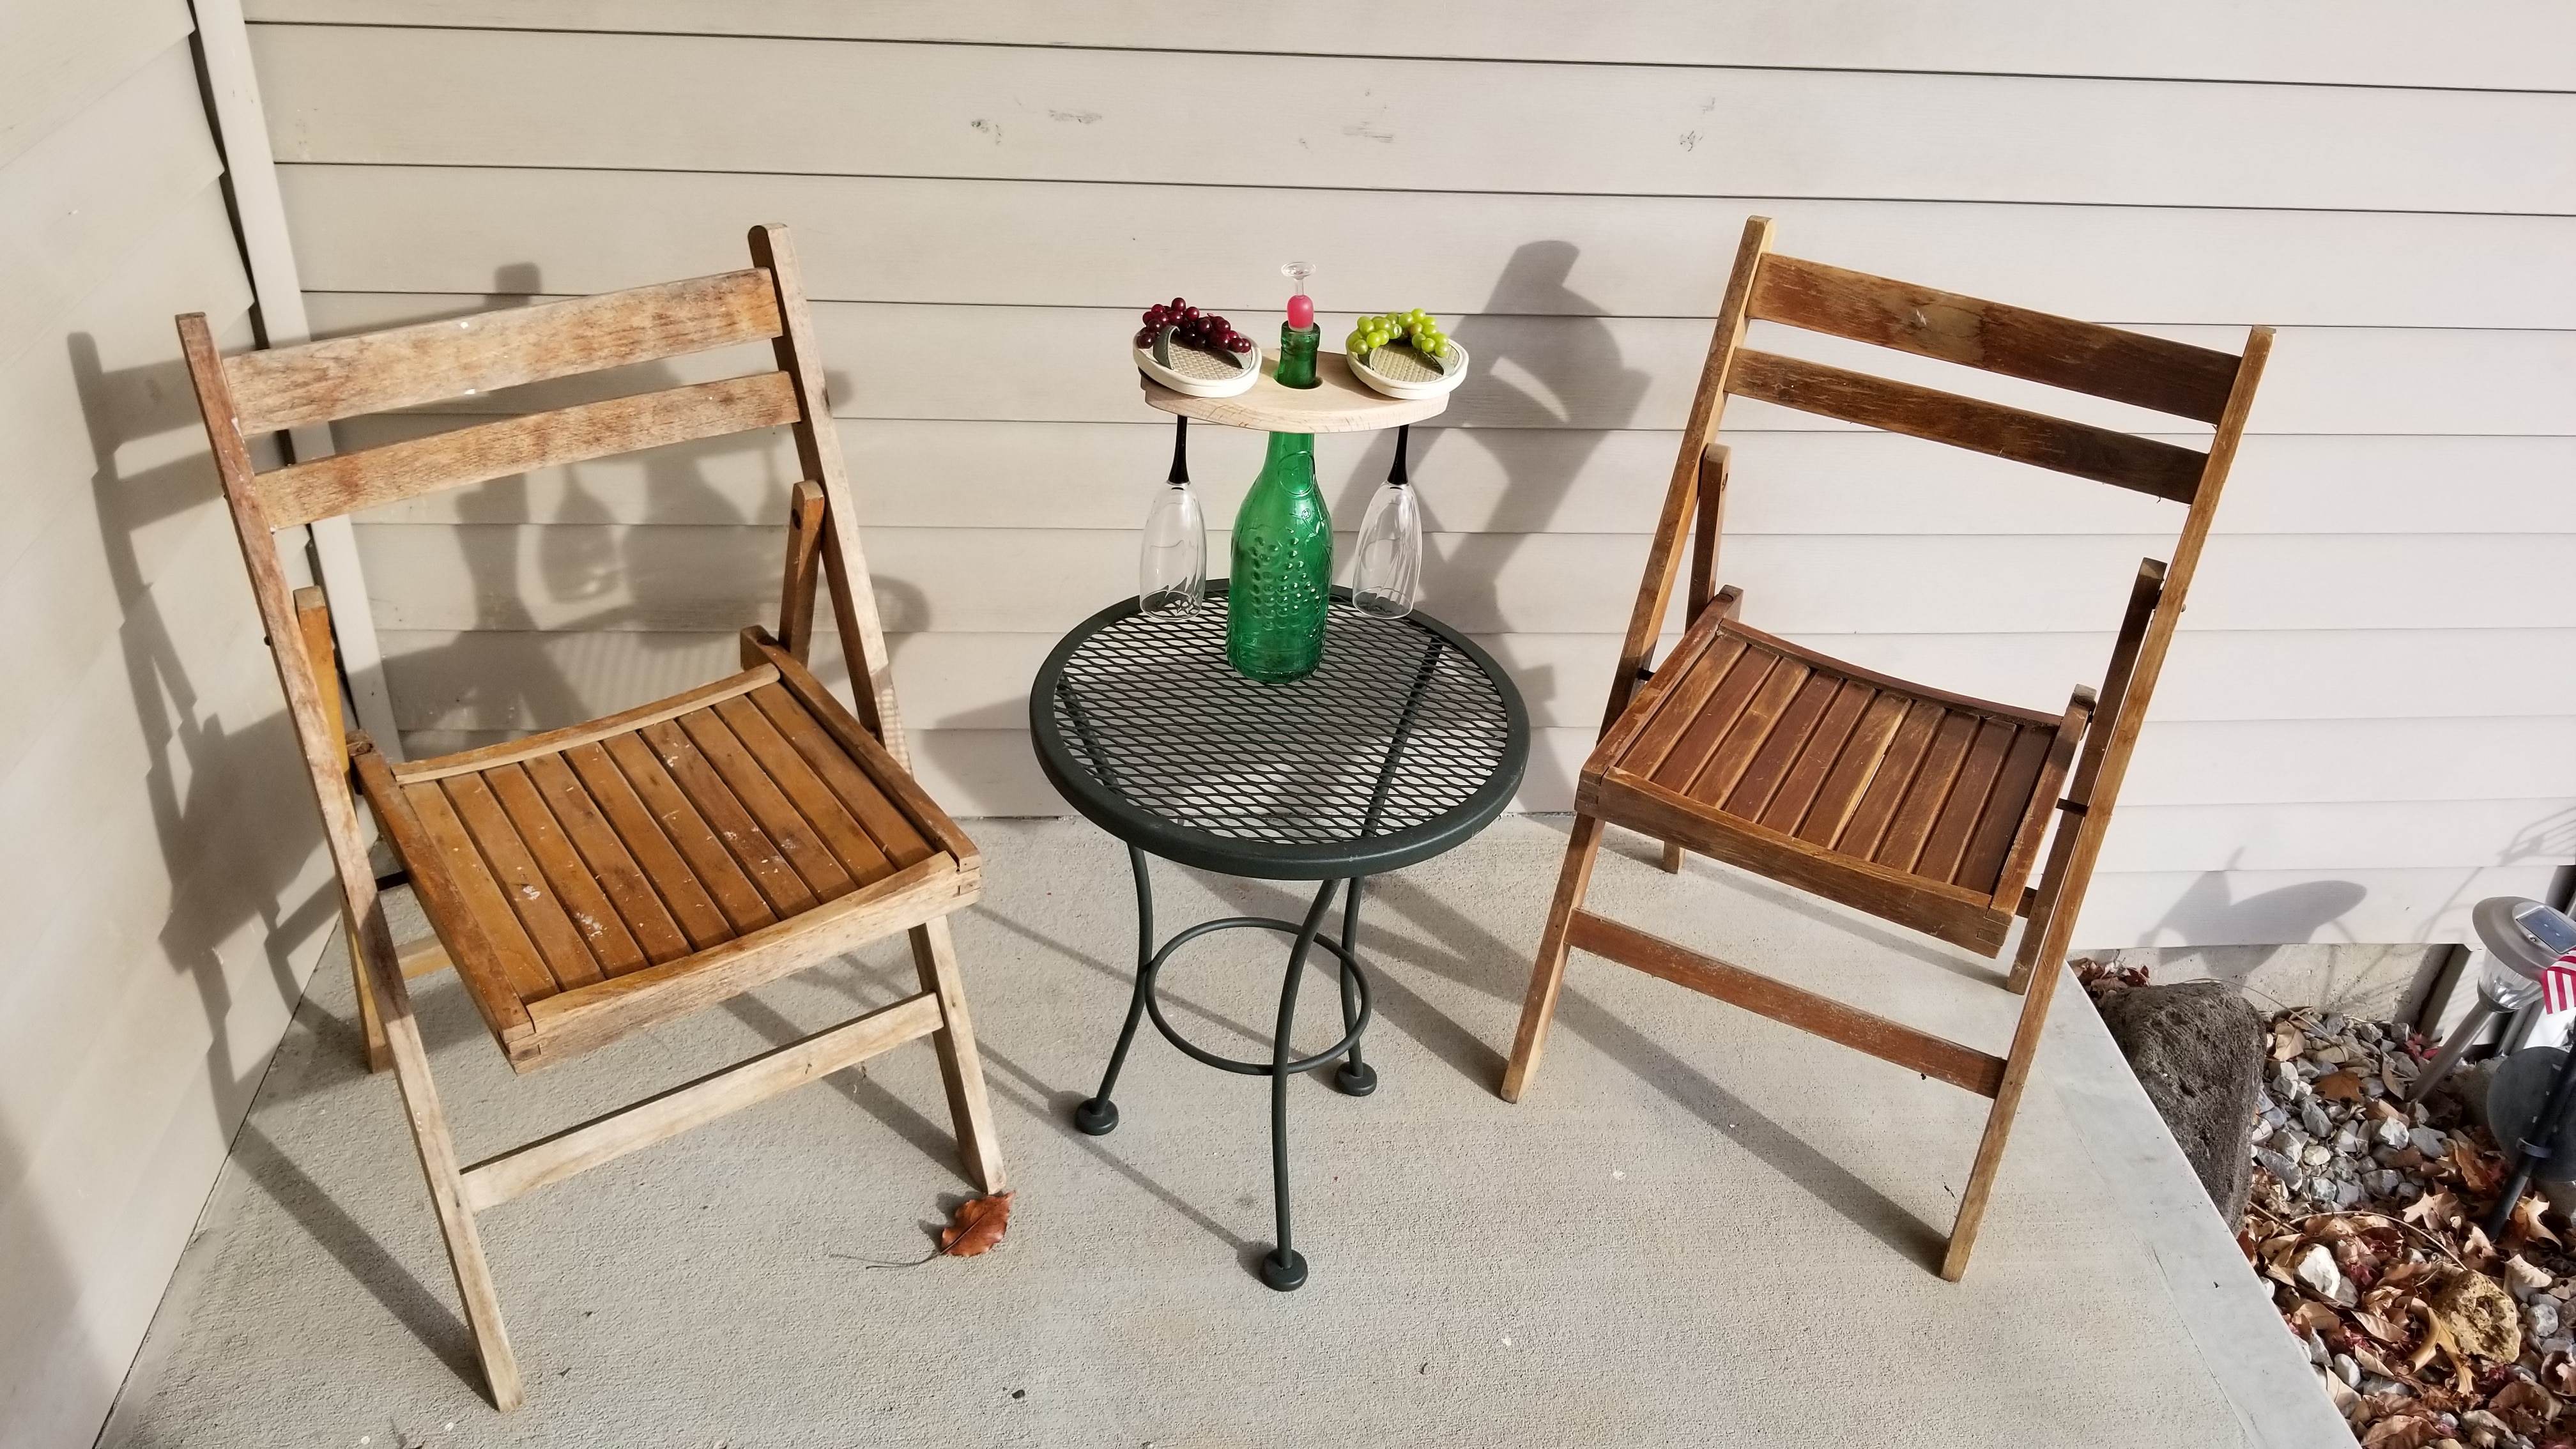 3 Piece Patio Sets-2 folding wooden chairs with side table